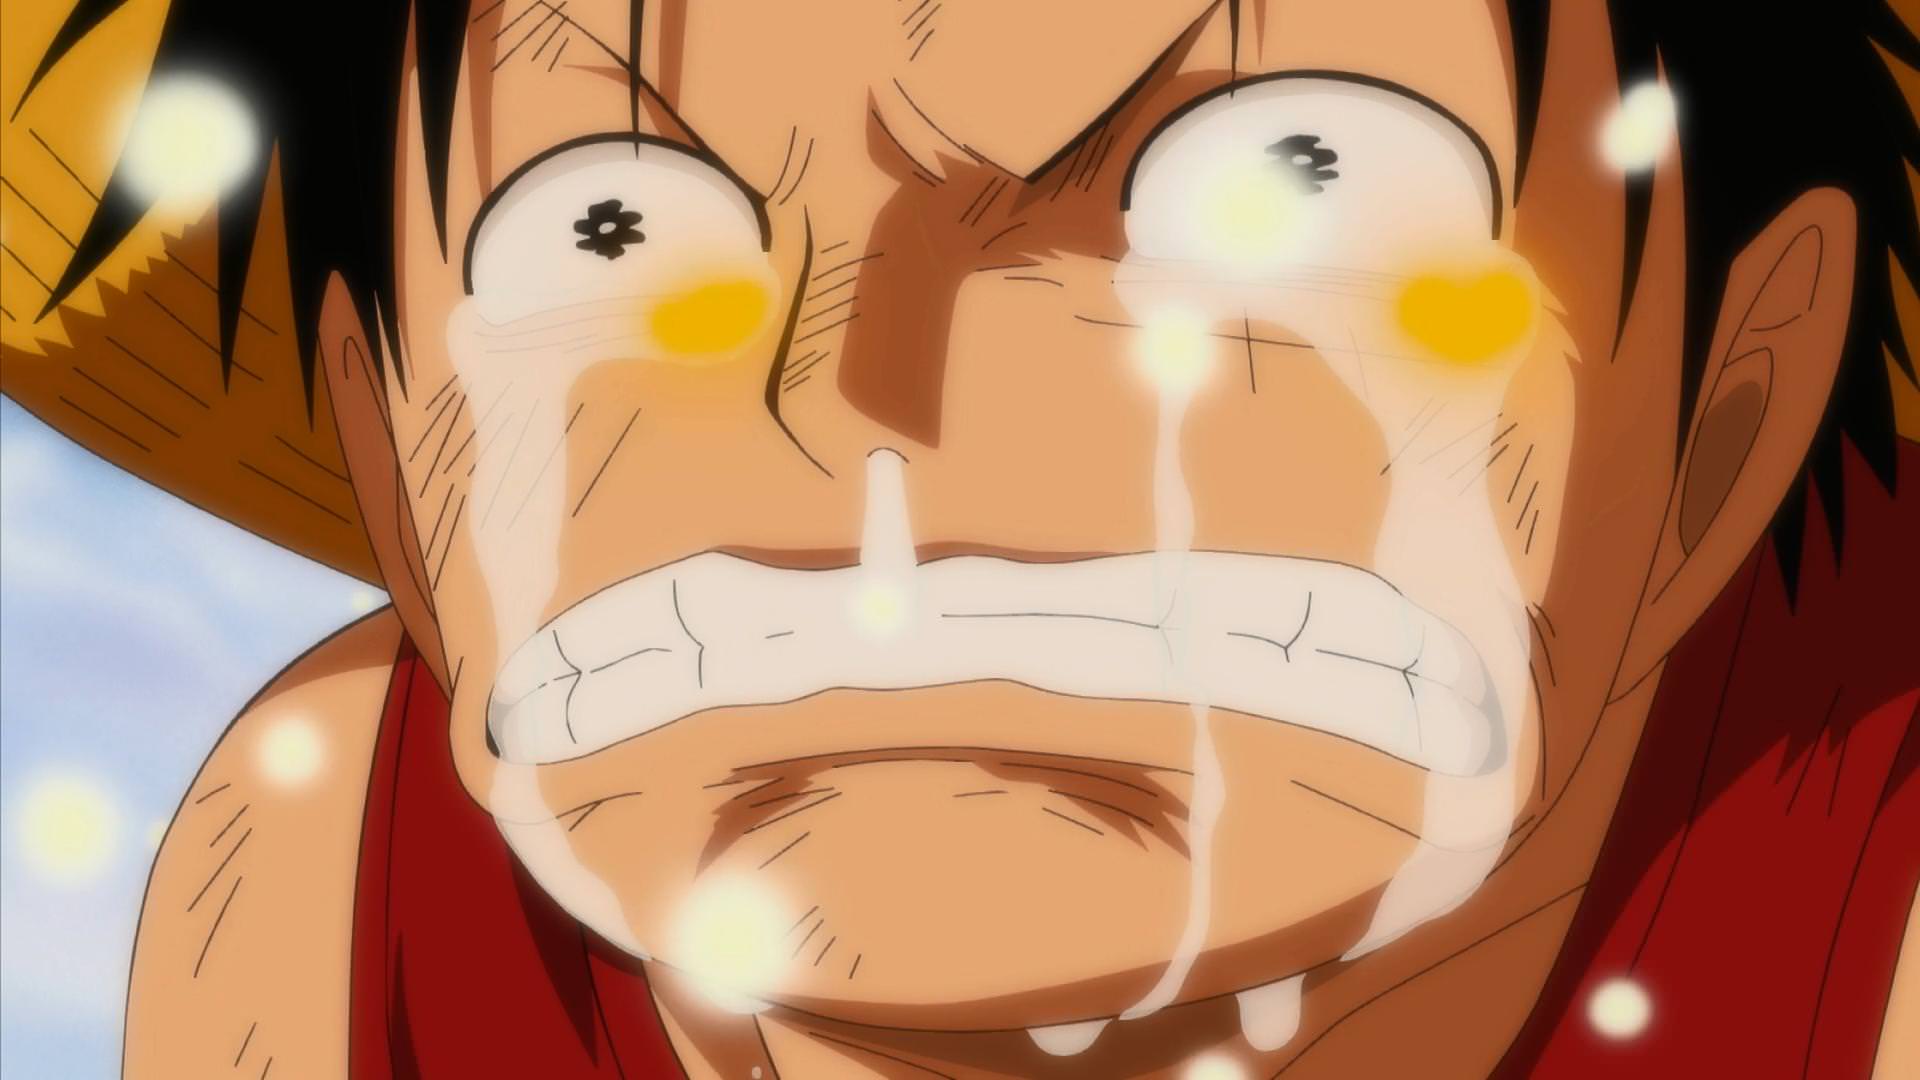 Funeral of Going merry, One Piece Episode 312